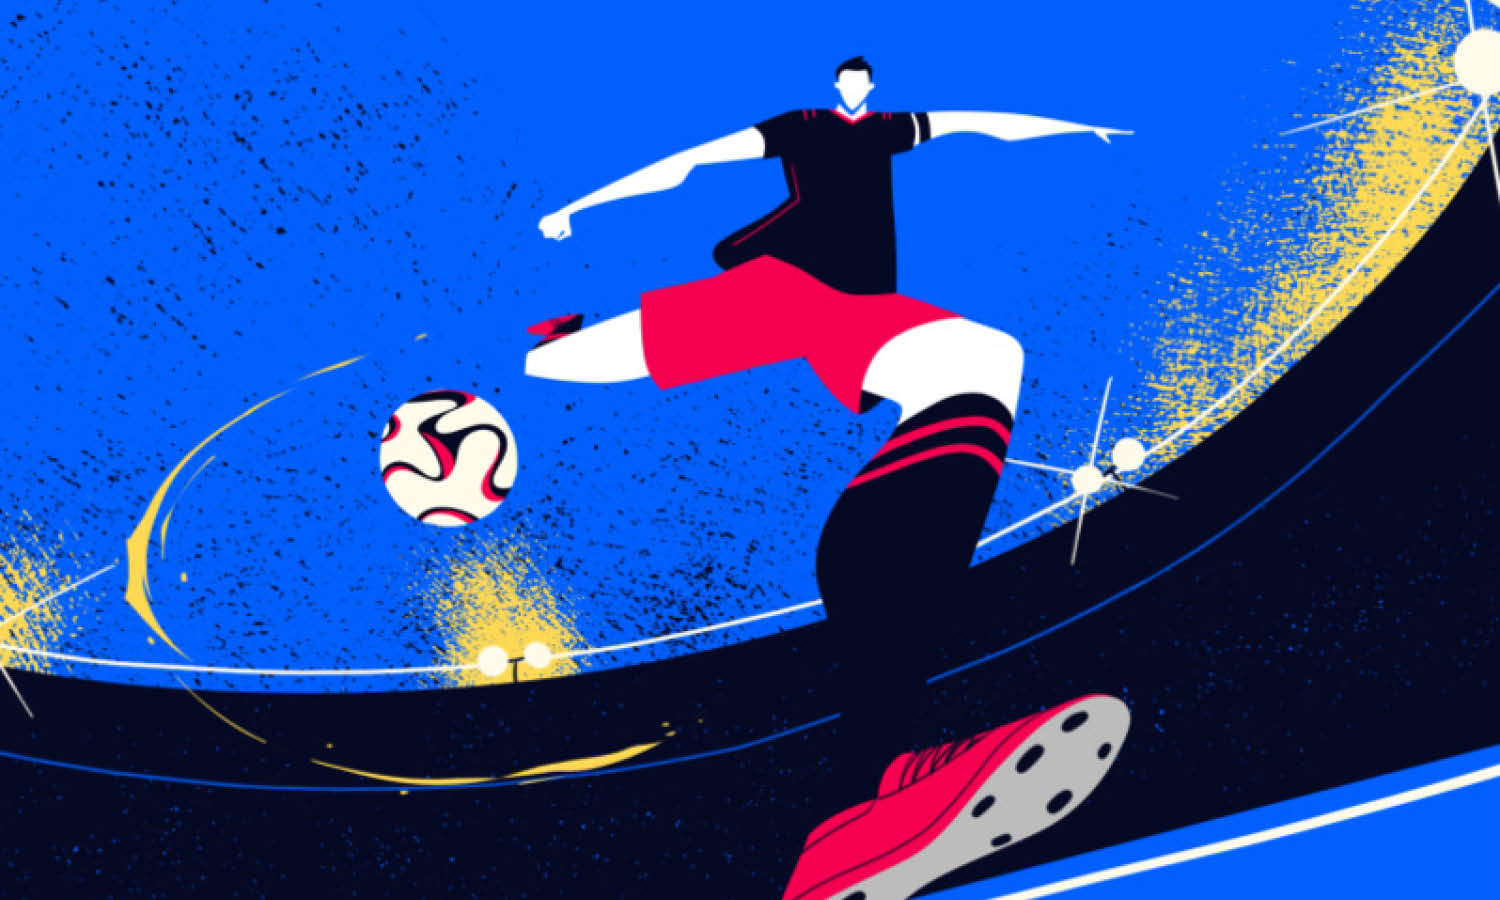 30 Best Football Illustration Ideas You Should Check